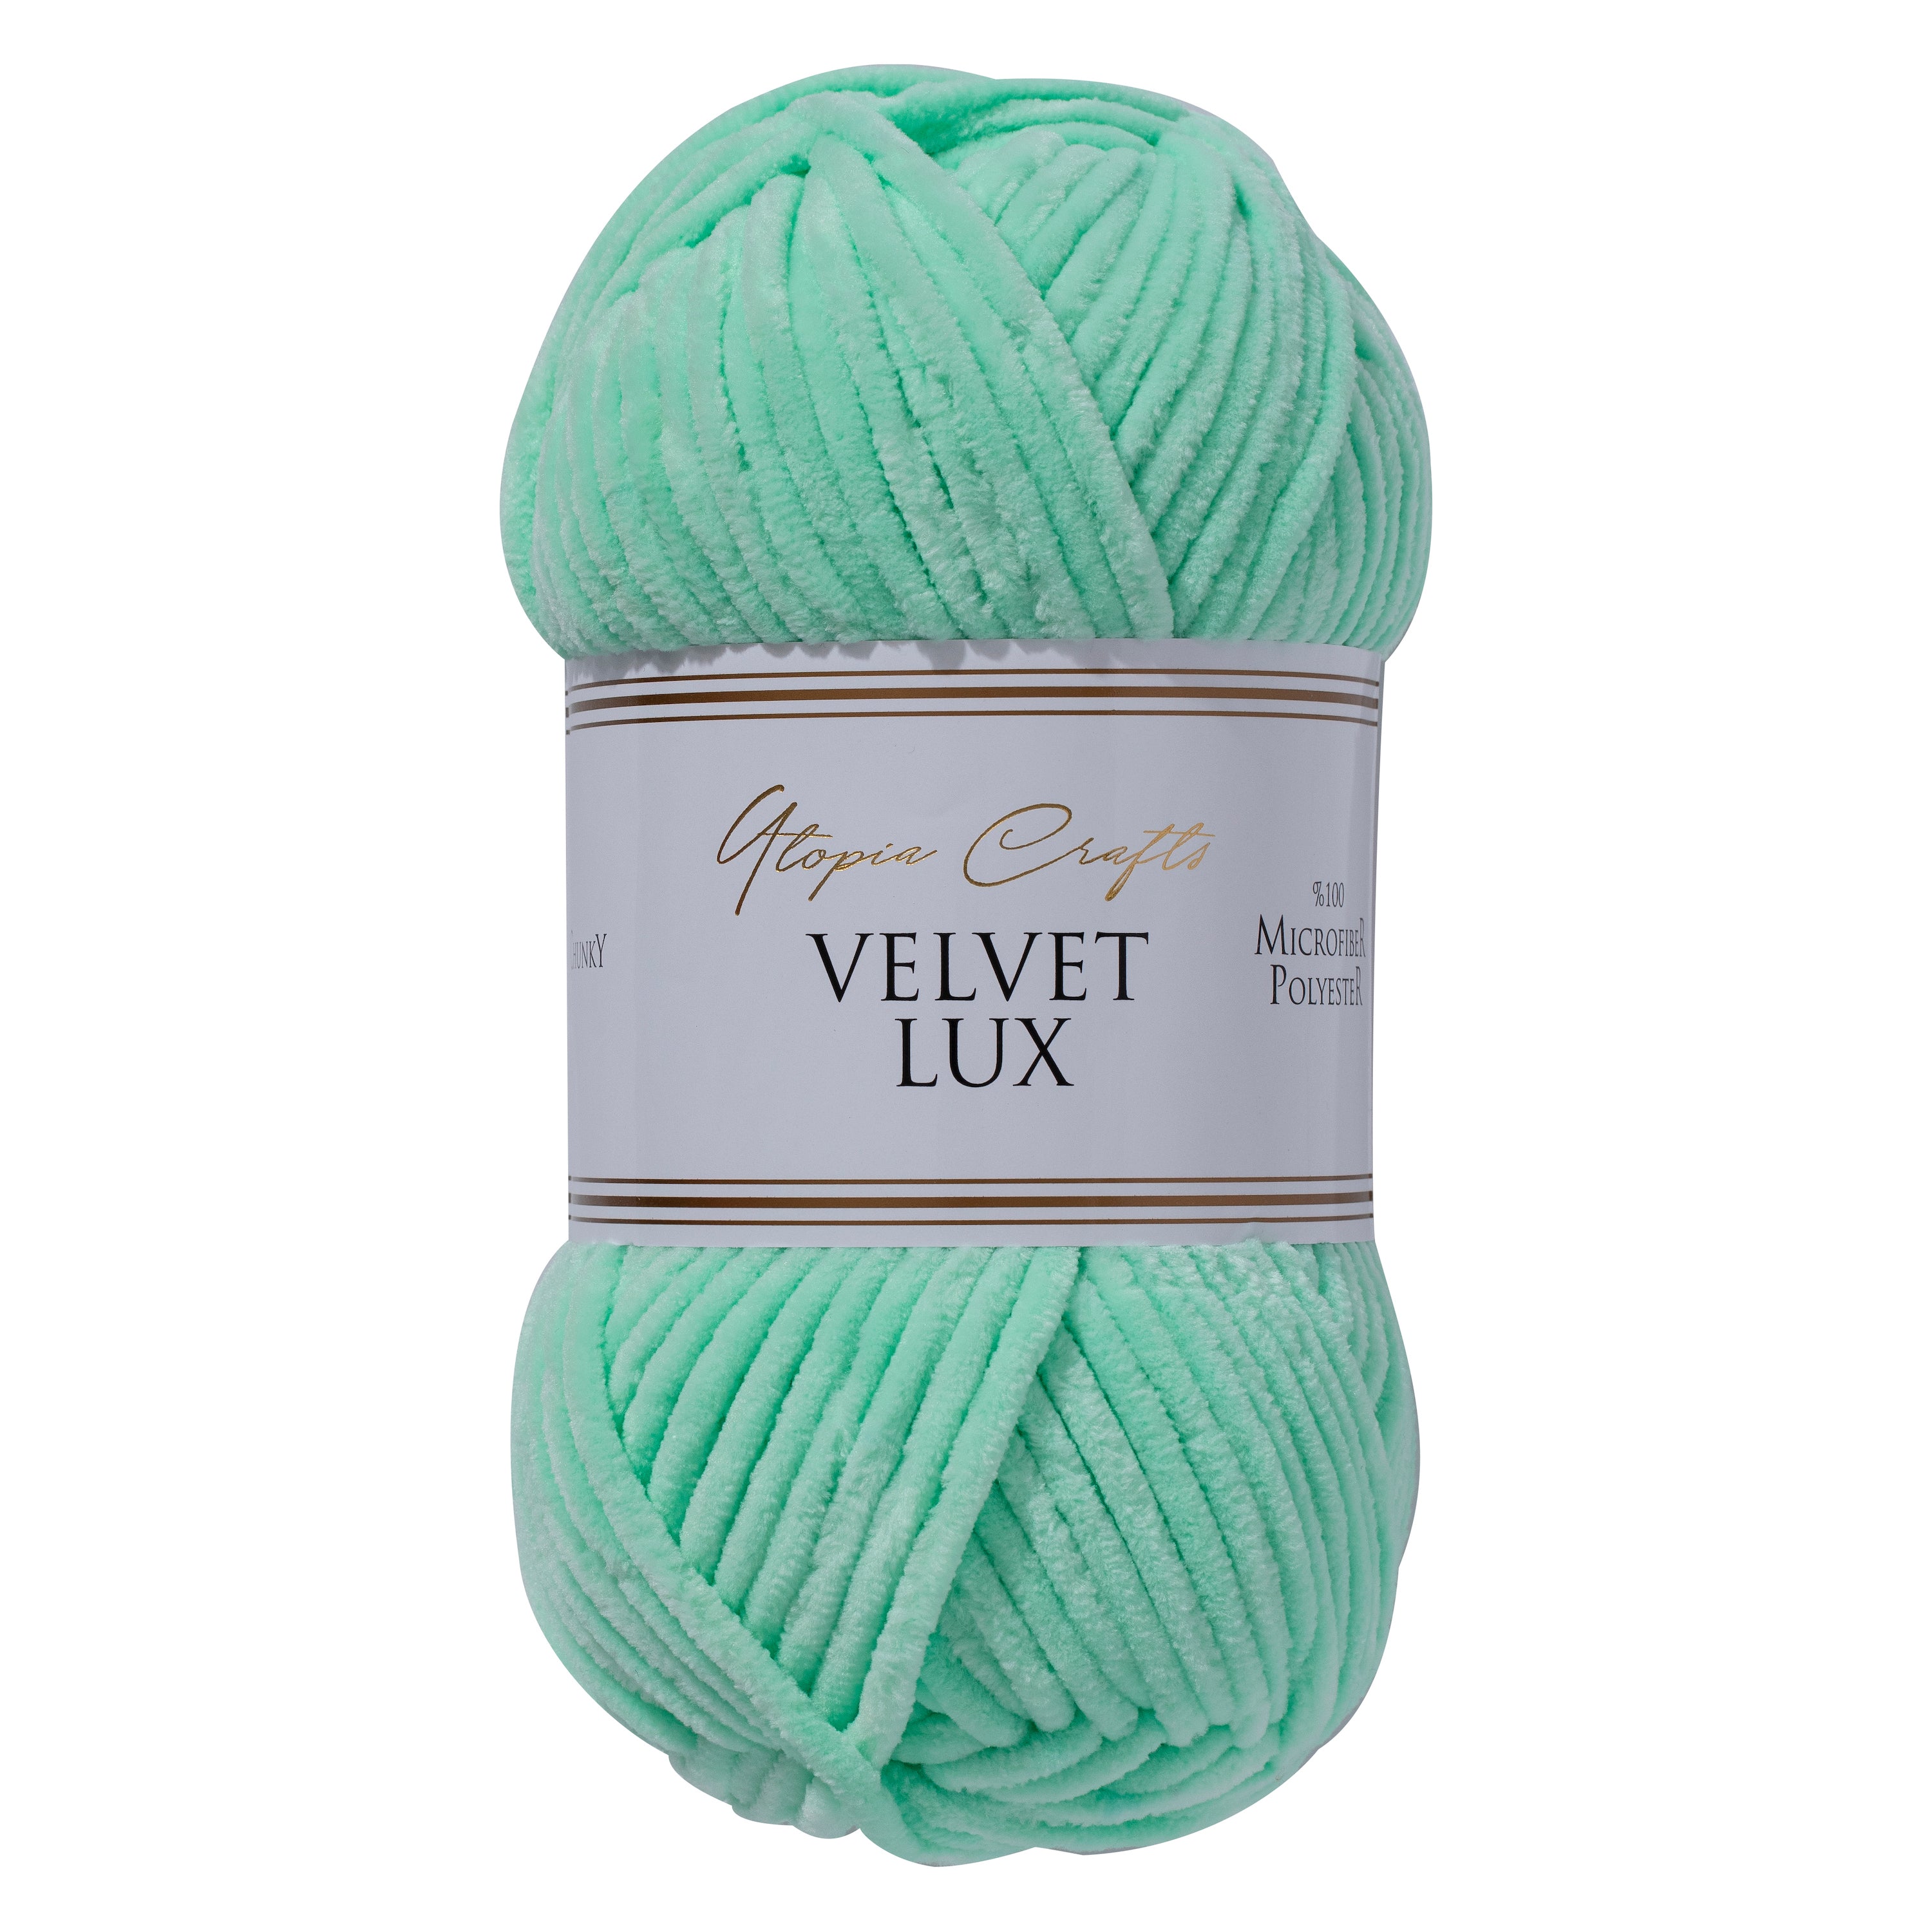 Utopia Crafts Velvet Lux Chenille Super Soft Chunky Yarn for Knitting and Crochet, 100g - 110m (Pale Teal)